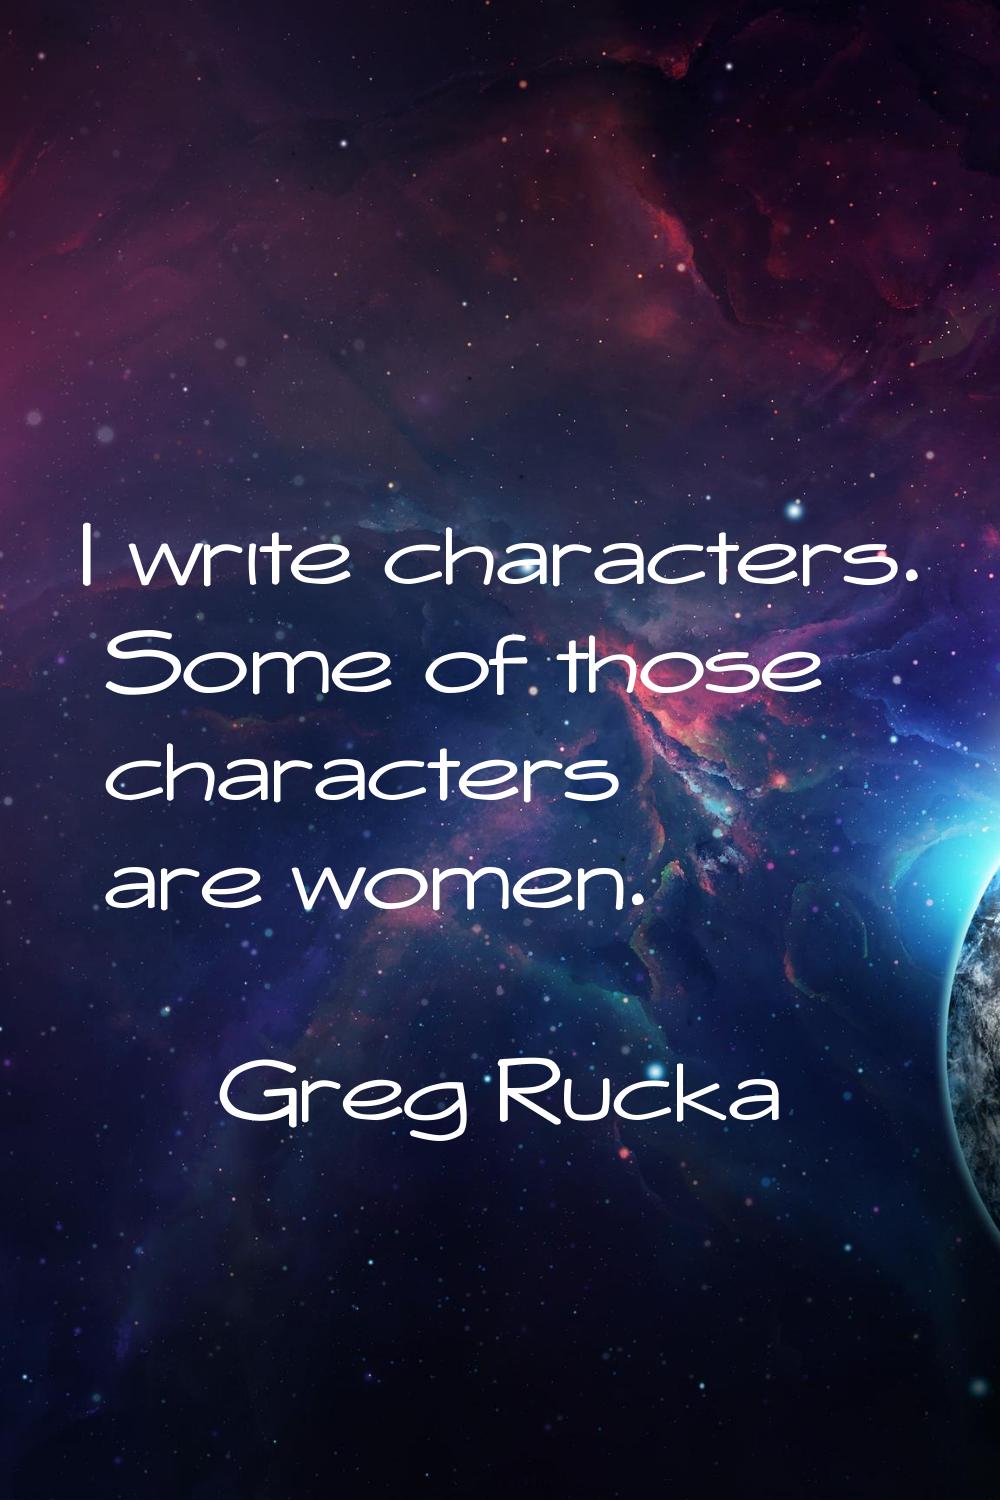 I write characters. Some of those characters are women.